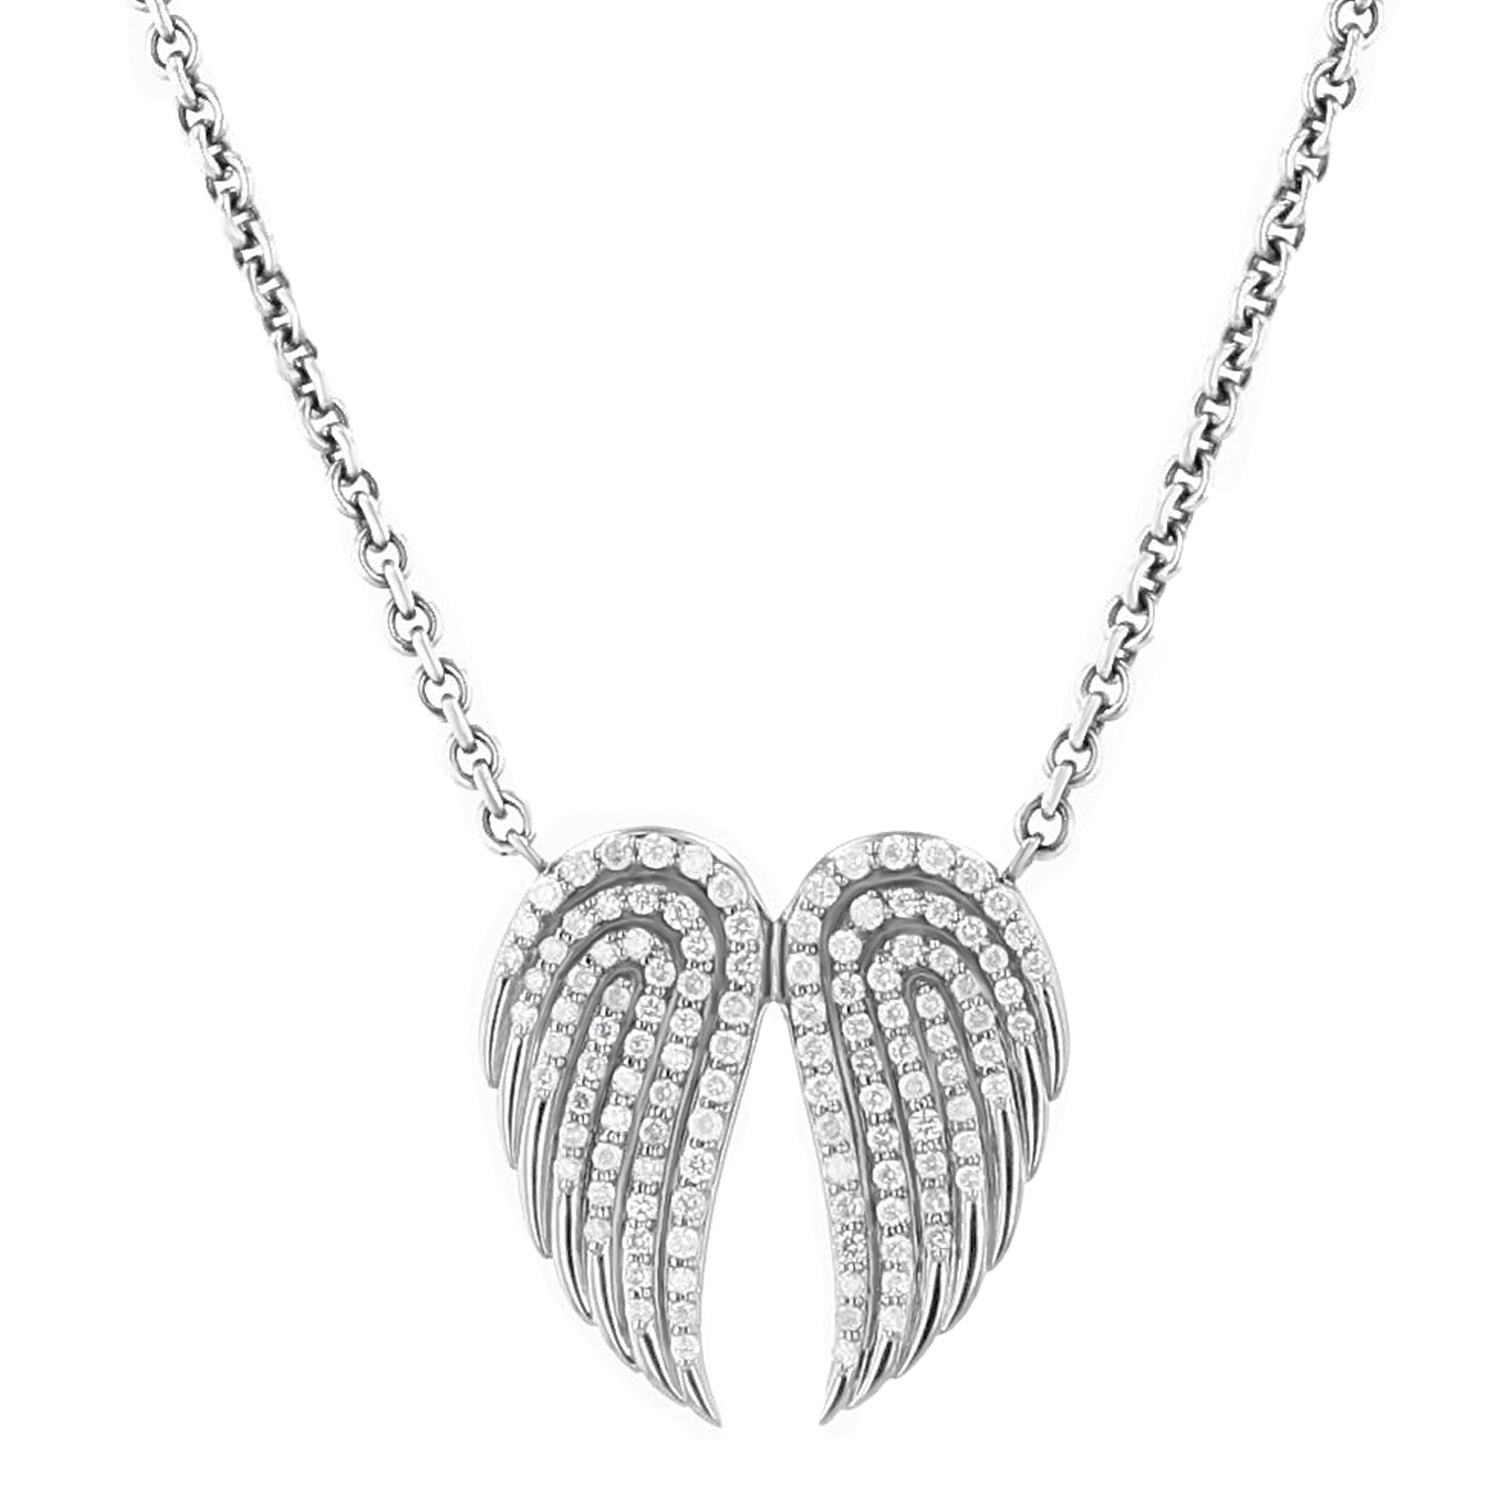 Diamond Double Angel Wing Pendant on Cable Chain Necklace - 17-18"  N0003504 - TBird